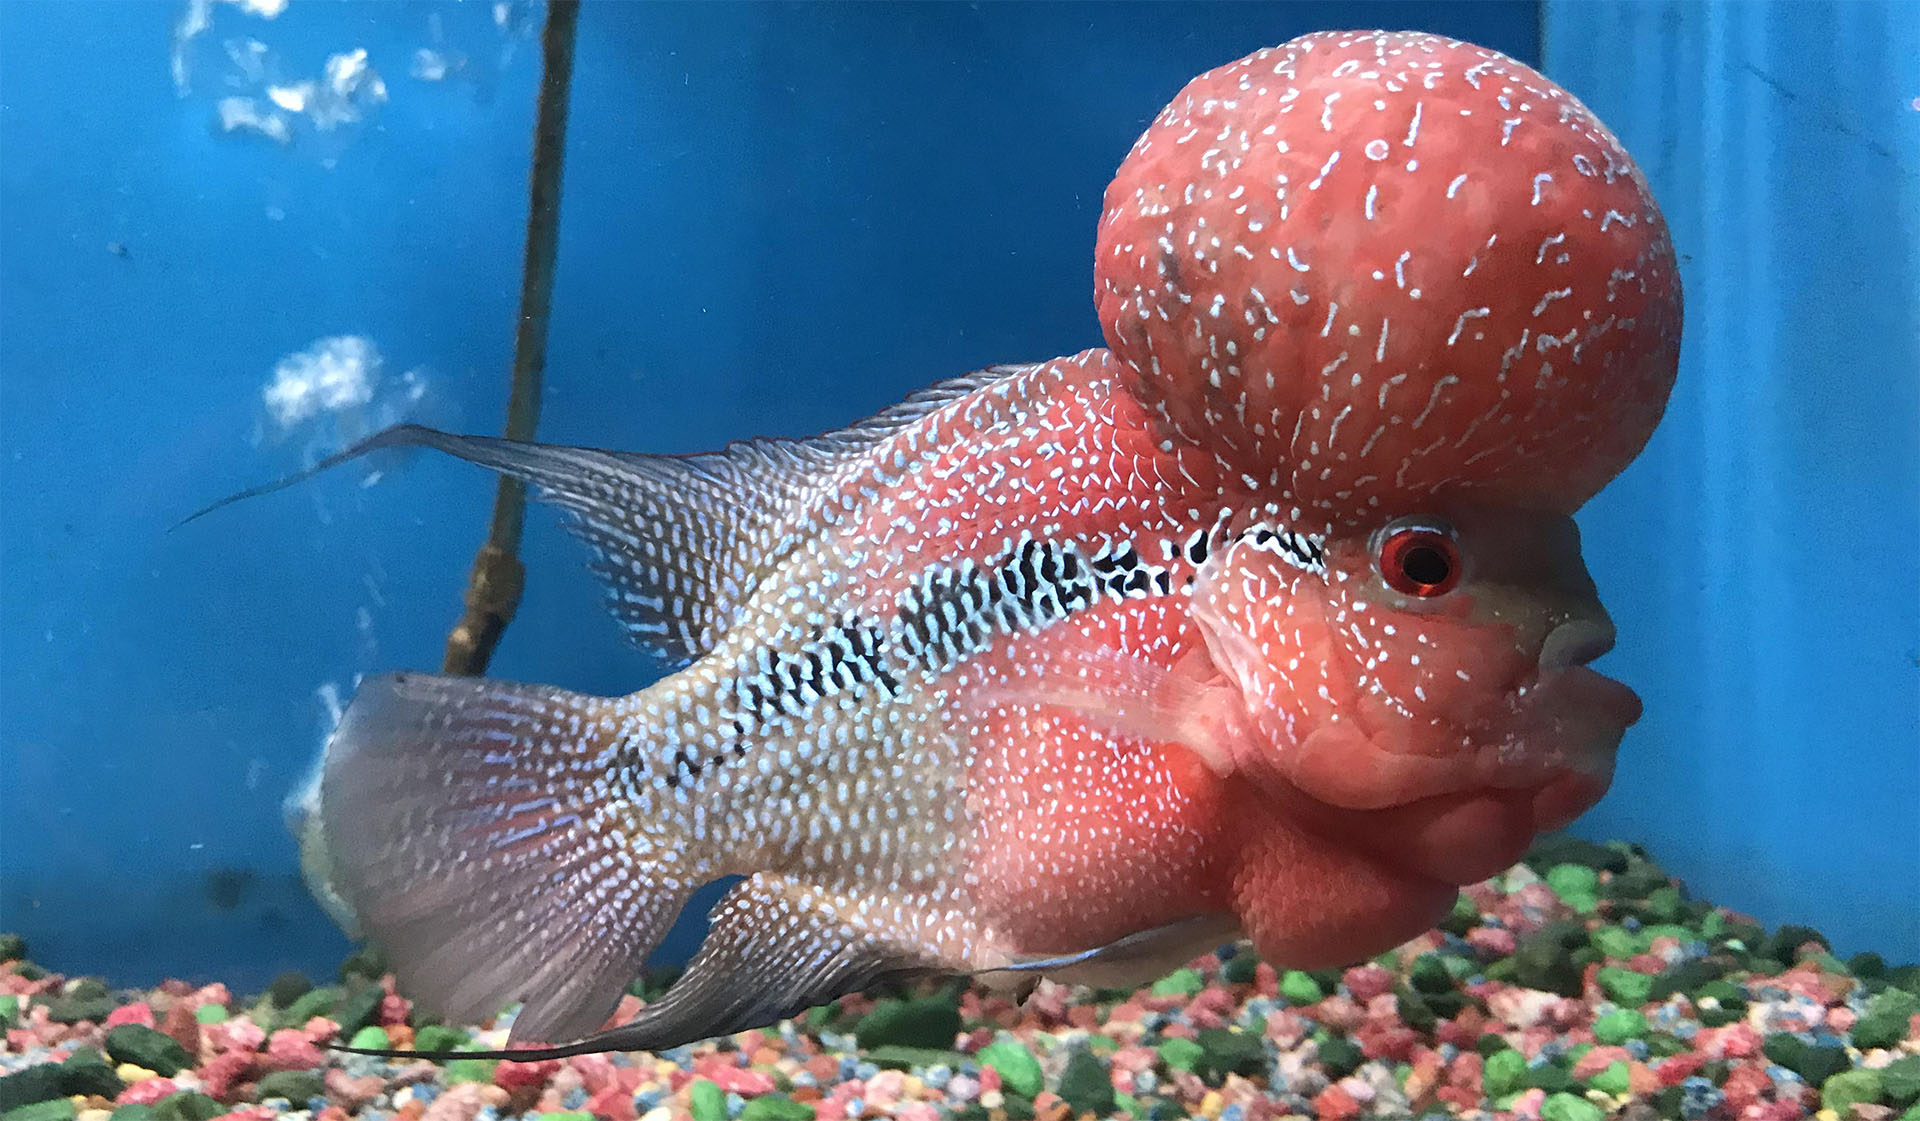 Flowerhorn-cichlid Top 10 Most Beautiful Colorful Fish Types